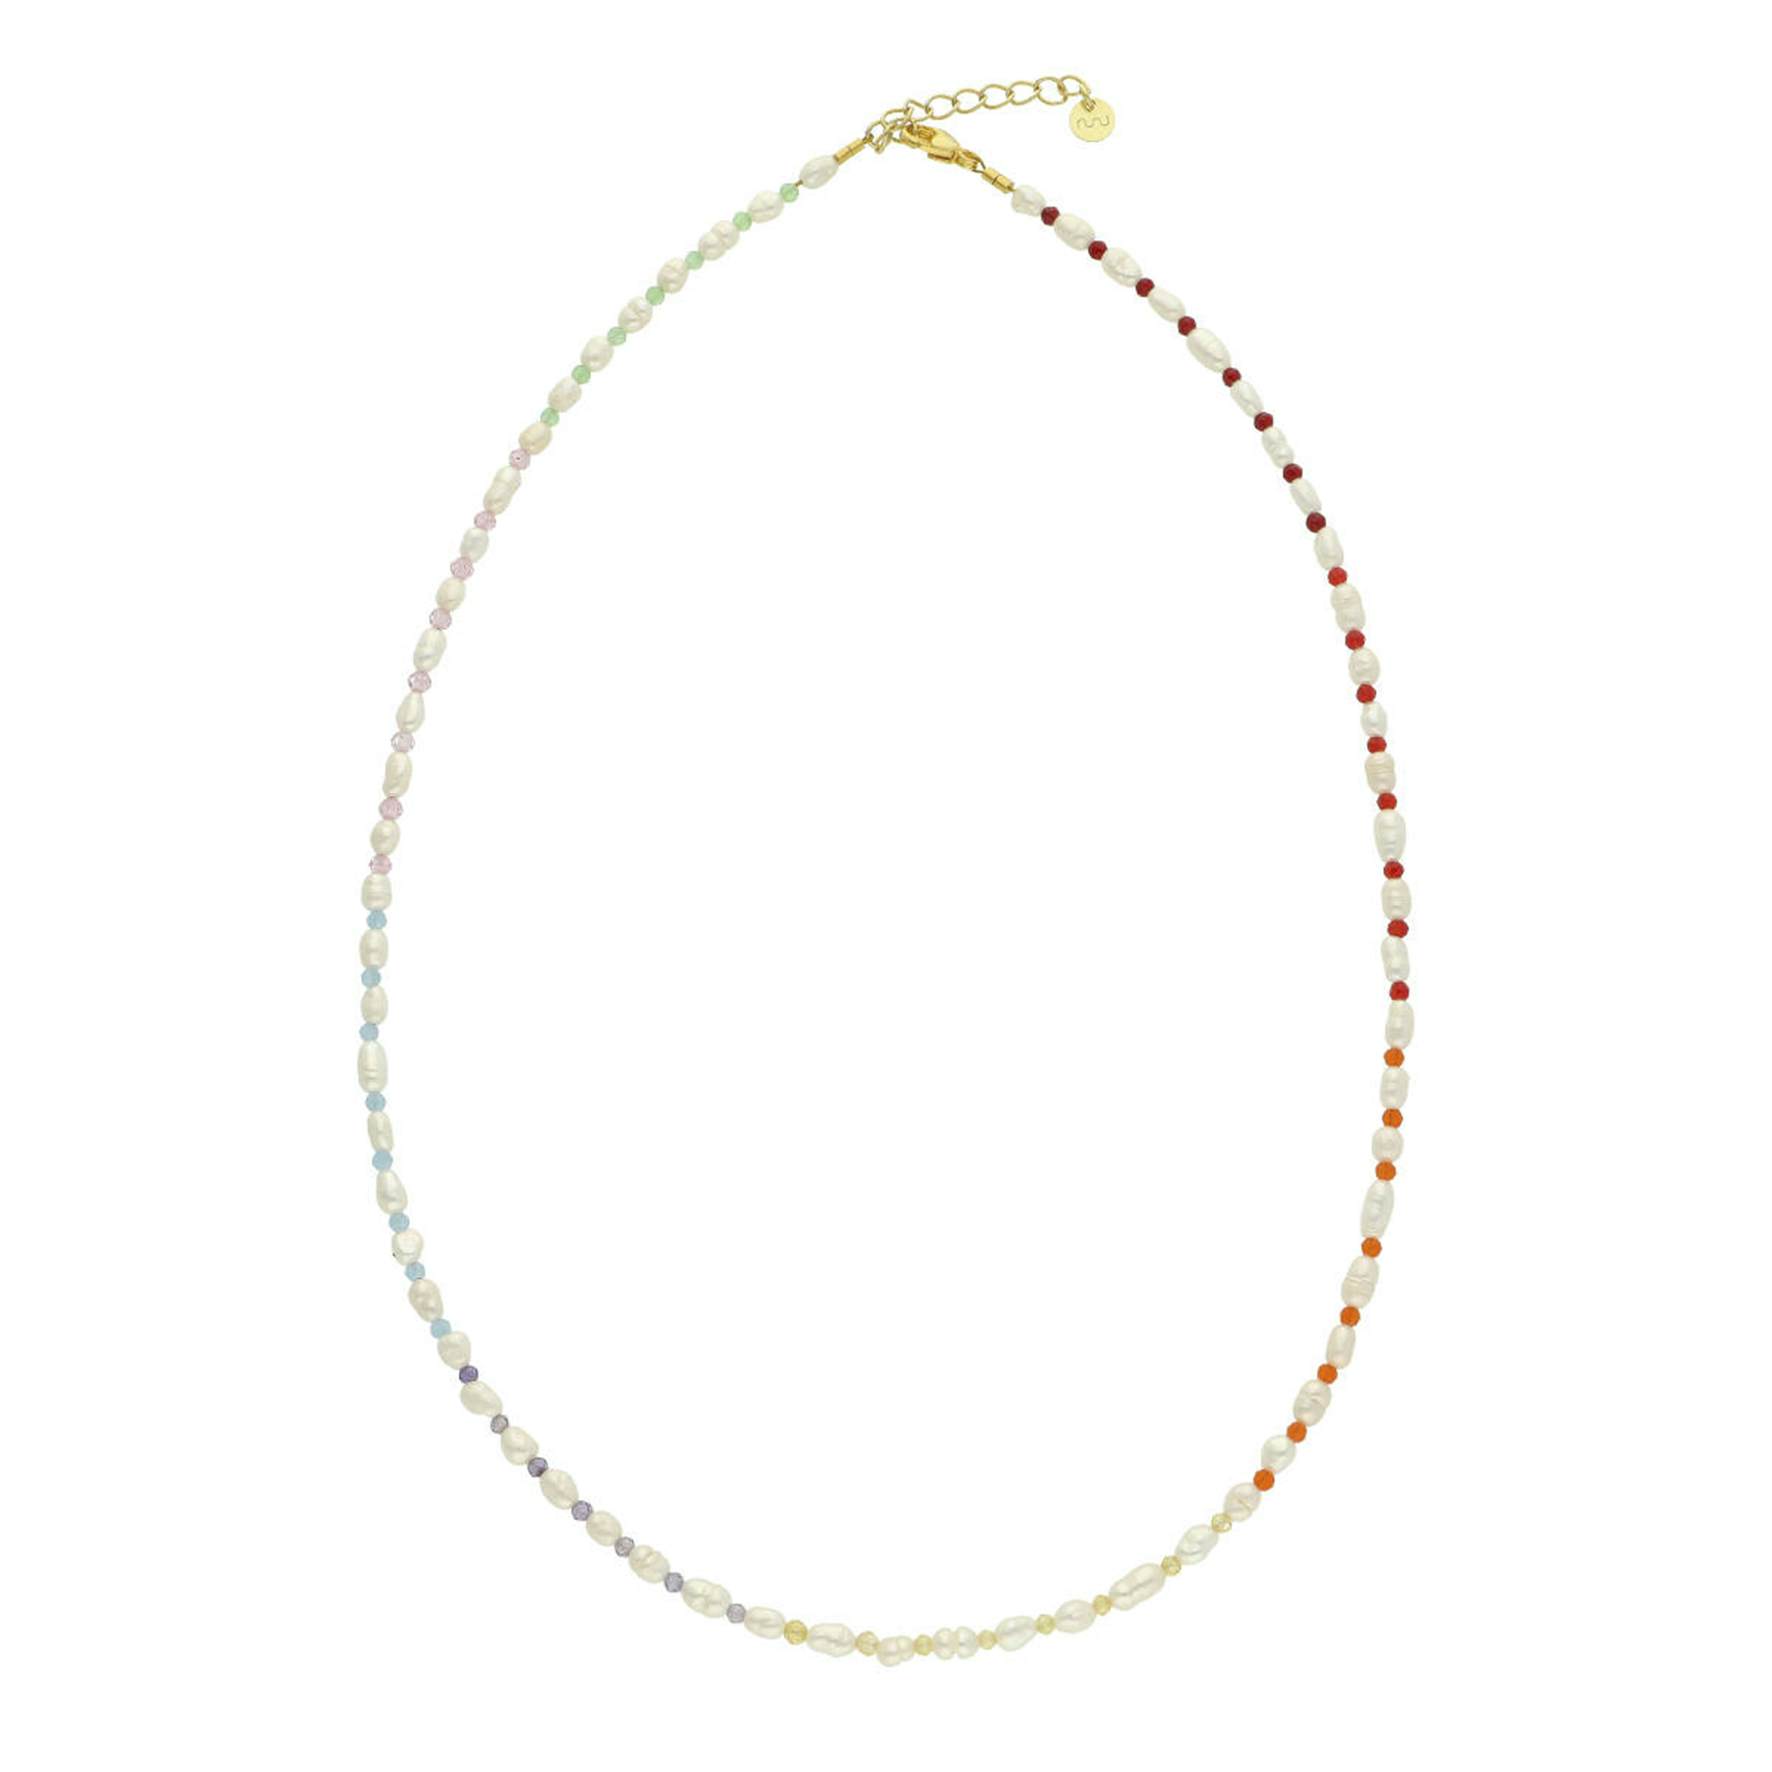 Lia Rainbow Necklace from Nuni Copenhagen in Goldplated-Silver Sterling 925